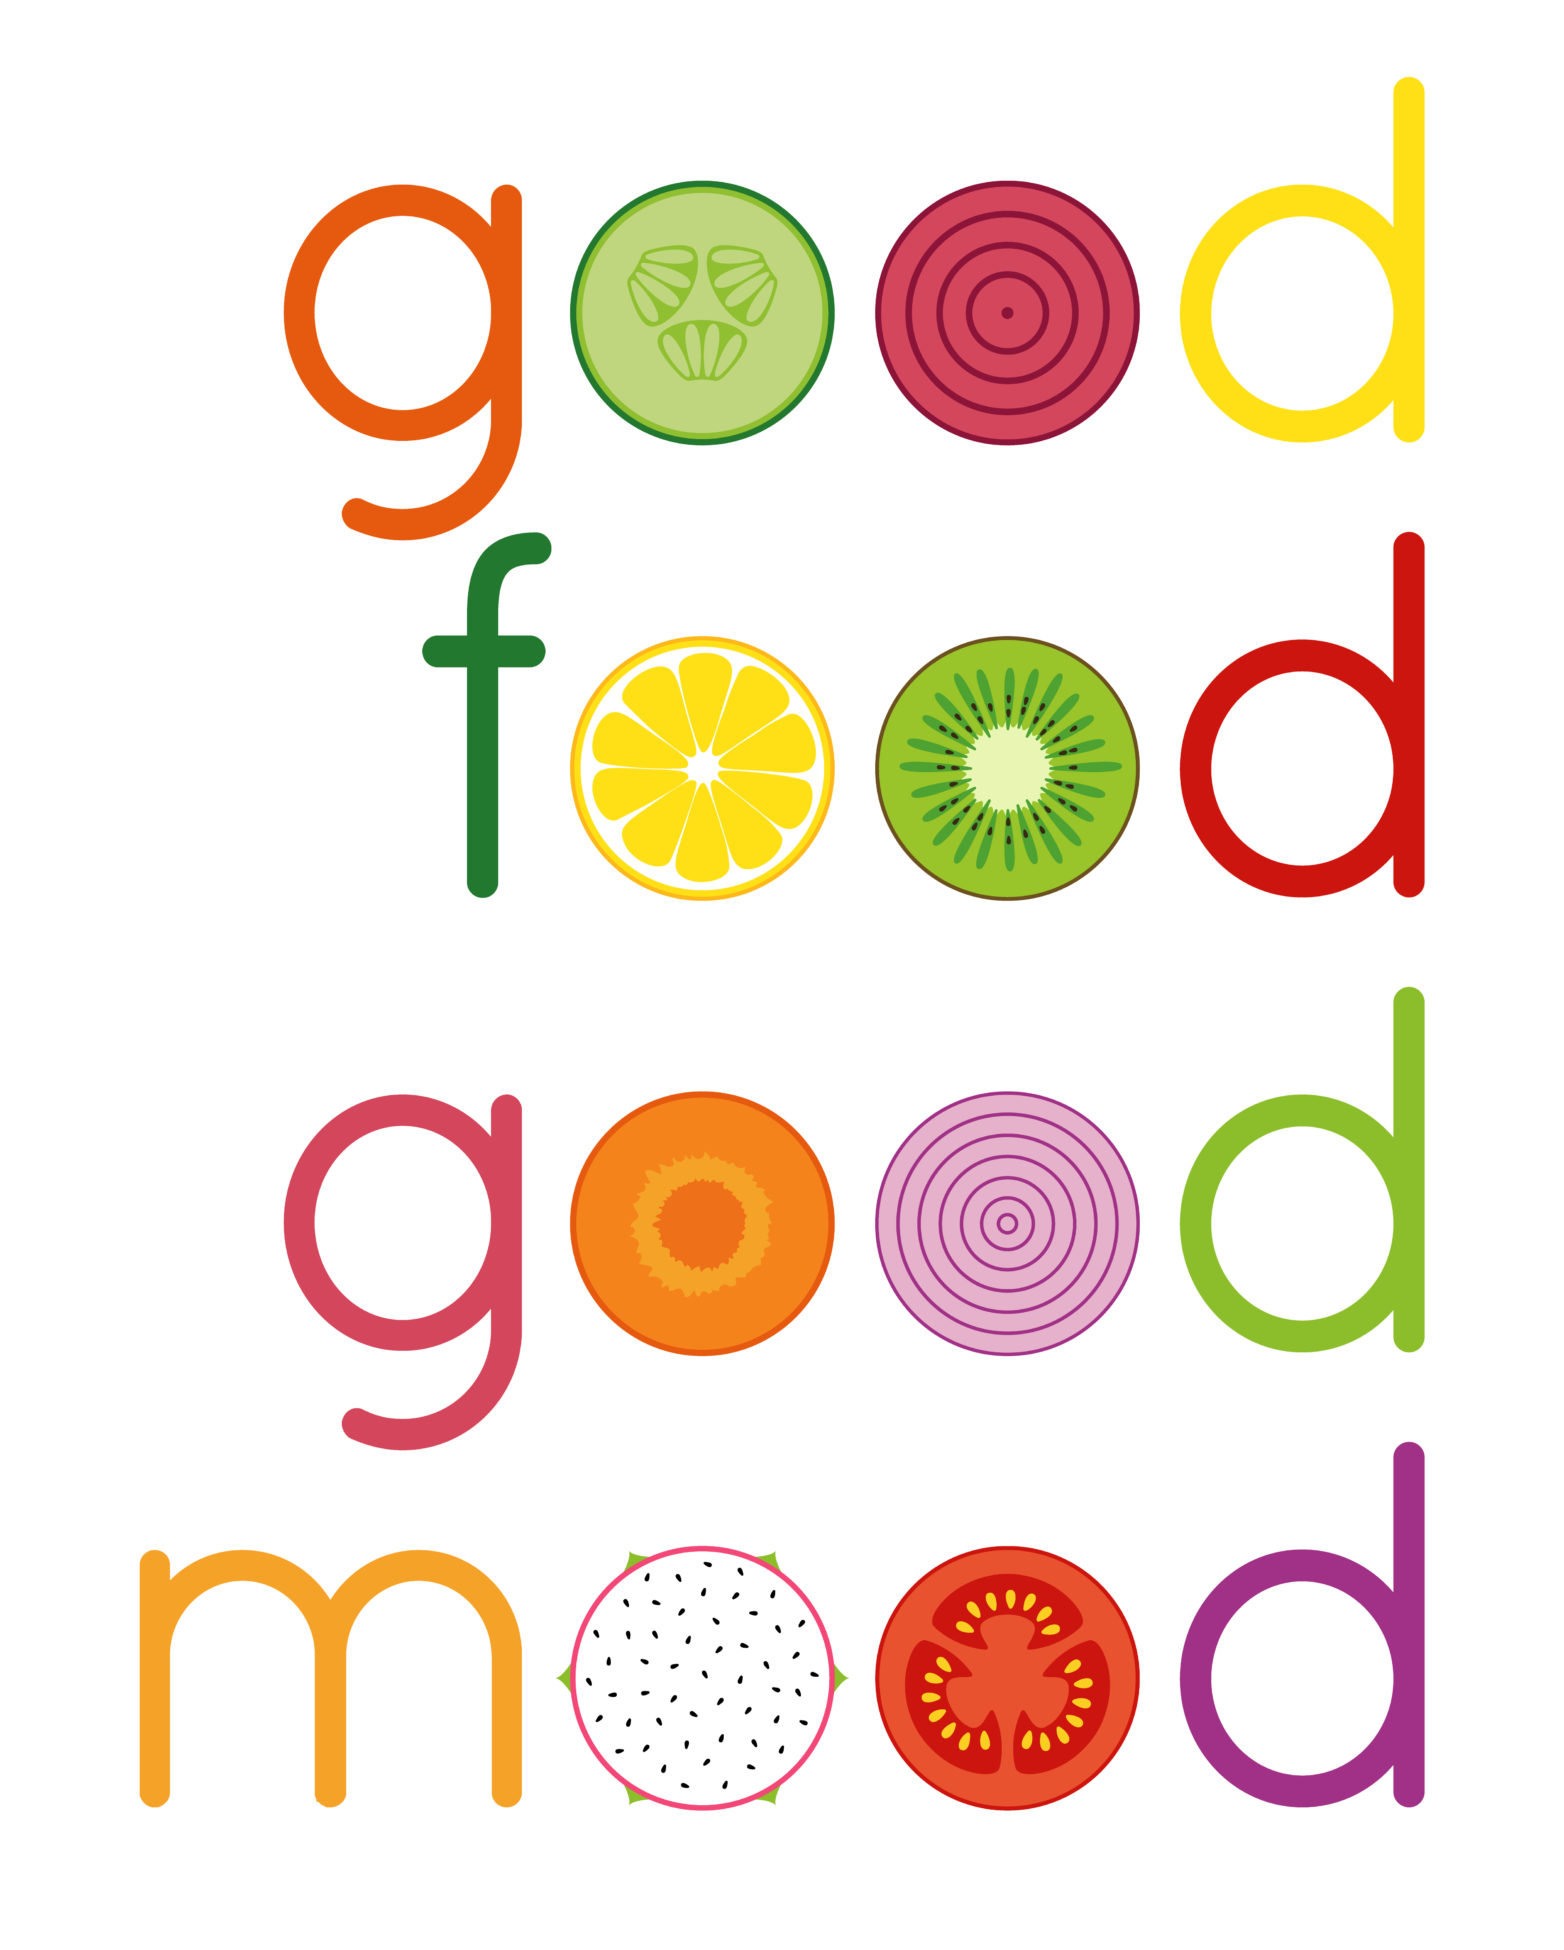 Colorful letters on a white background, spelling out 'good food good mood' with fruit slices as the 'o's